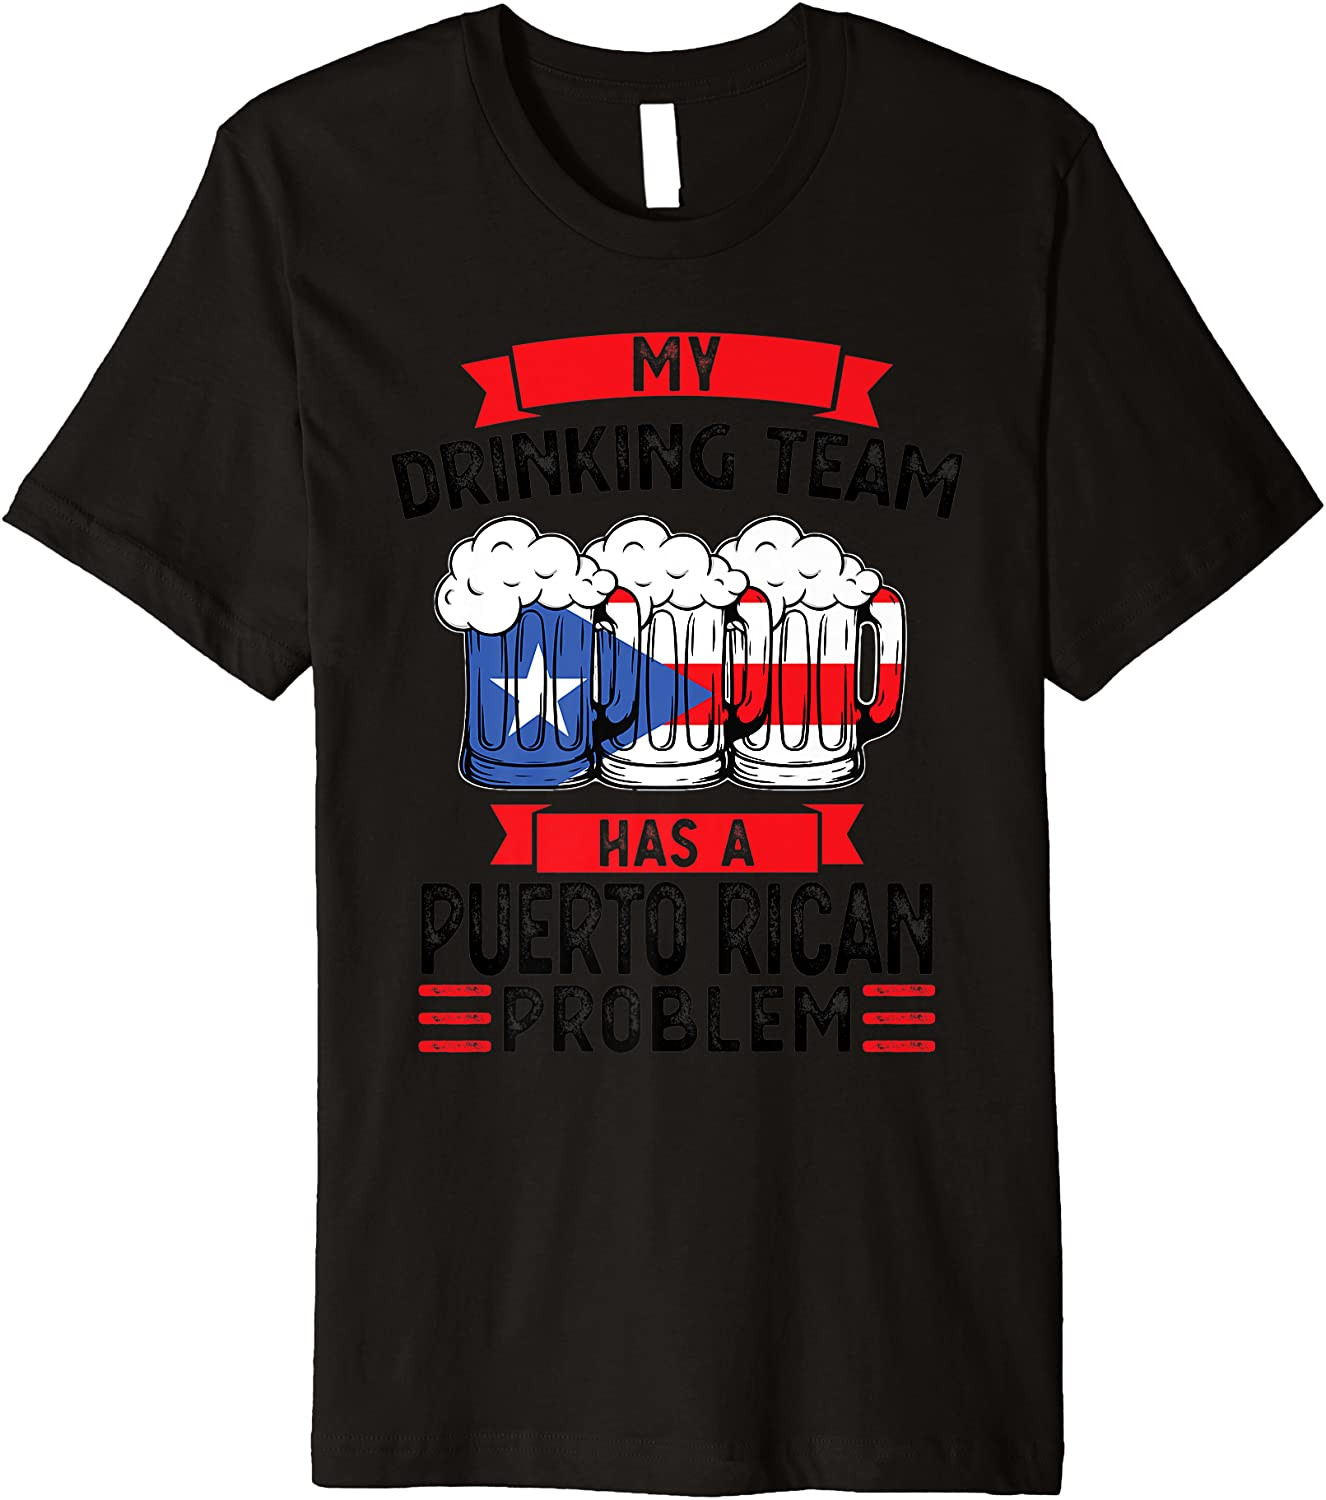 My Drinking Team Has A Puerto Rican Problem Beer T-Shirt